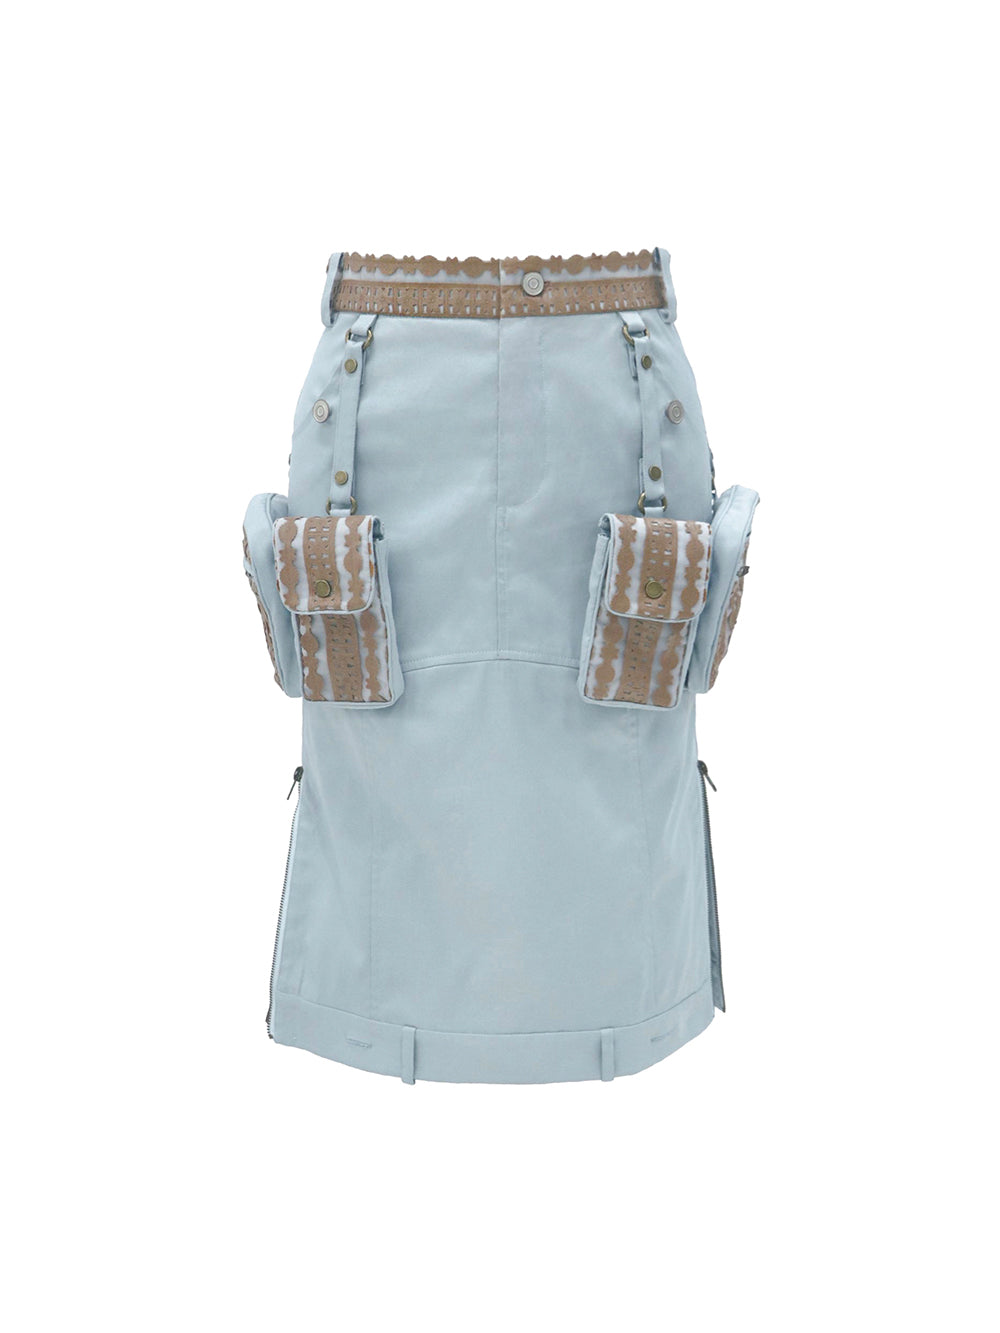 MUKTANK x COOLOTHES Light Blue Floral Organza Bag Component Folded Double-Waisted Wide A-line Skirt